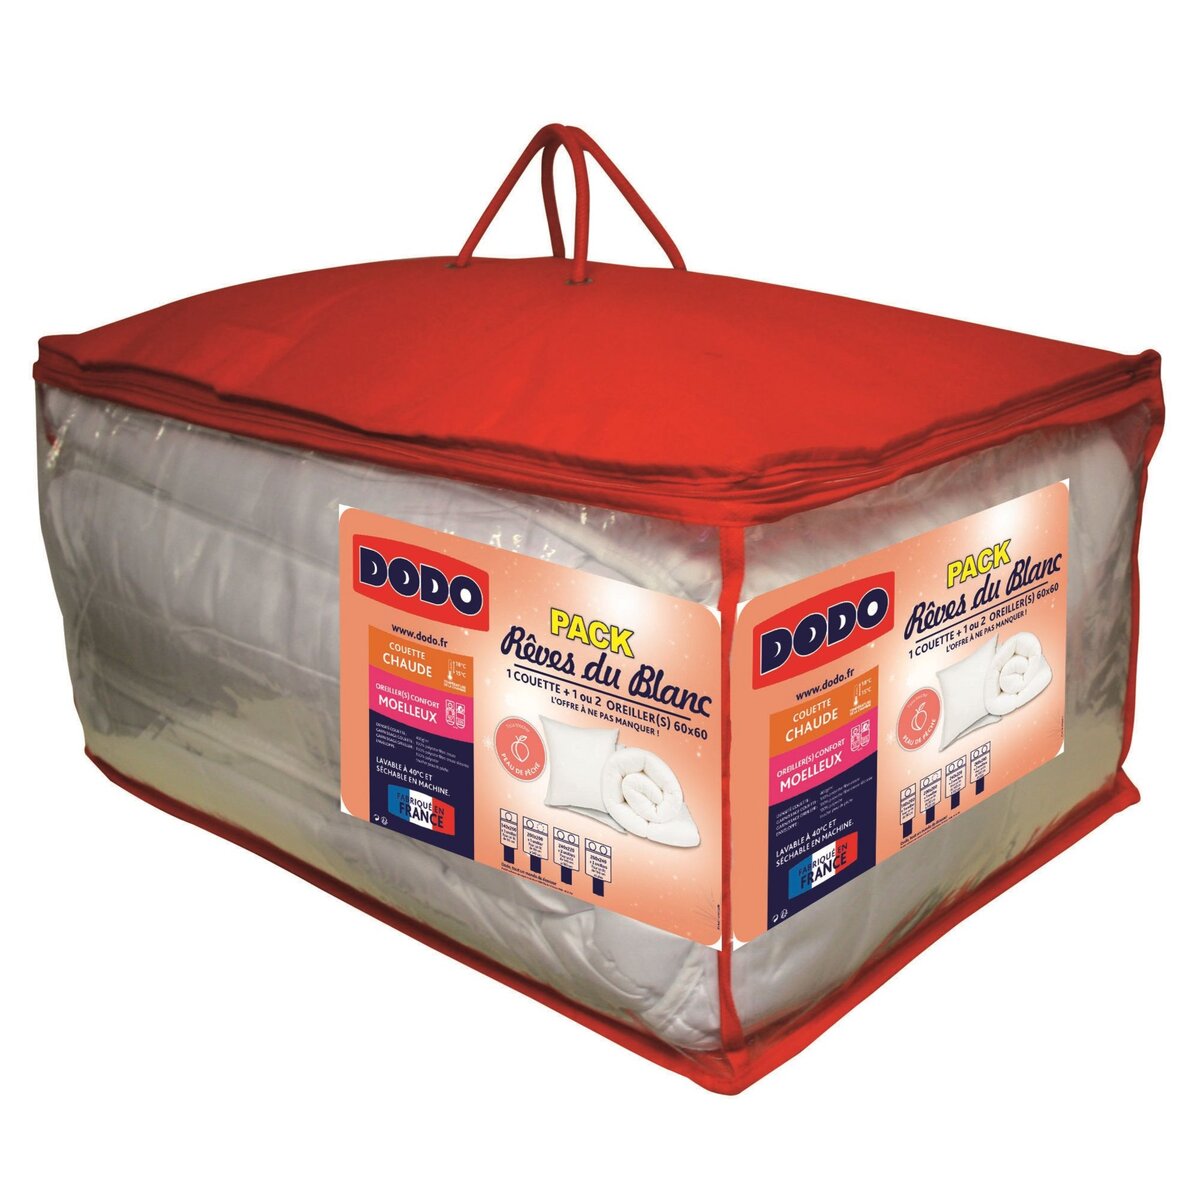 DODO Pack couette 400g/m2 + oreiller moelleux polyester